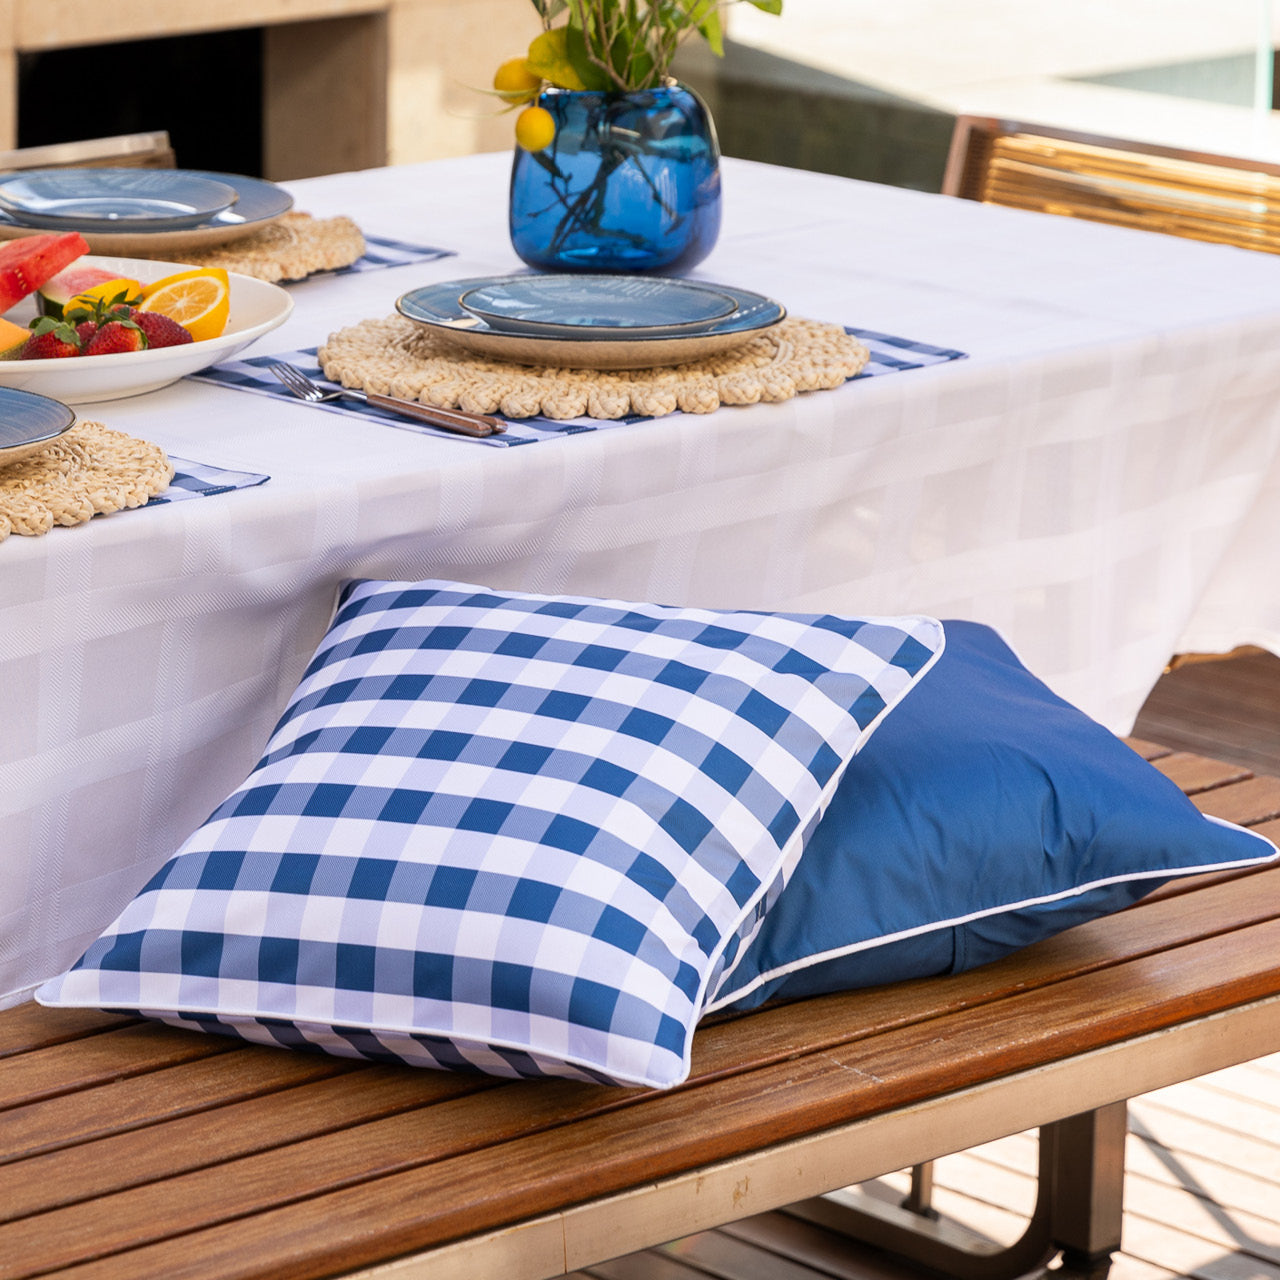 Lifestyle shot of Trinity Scatter Cushions on seat next to table